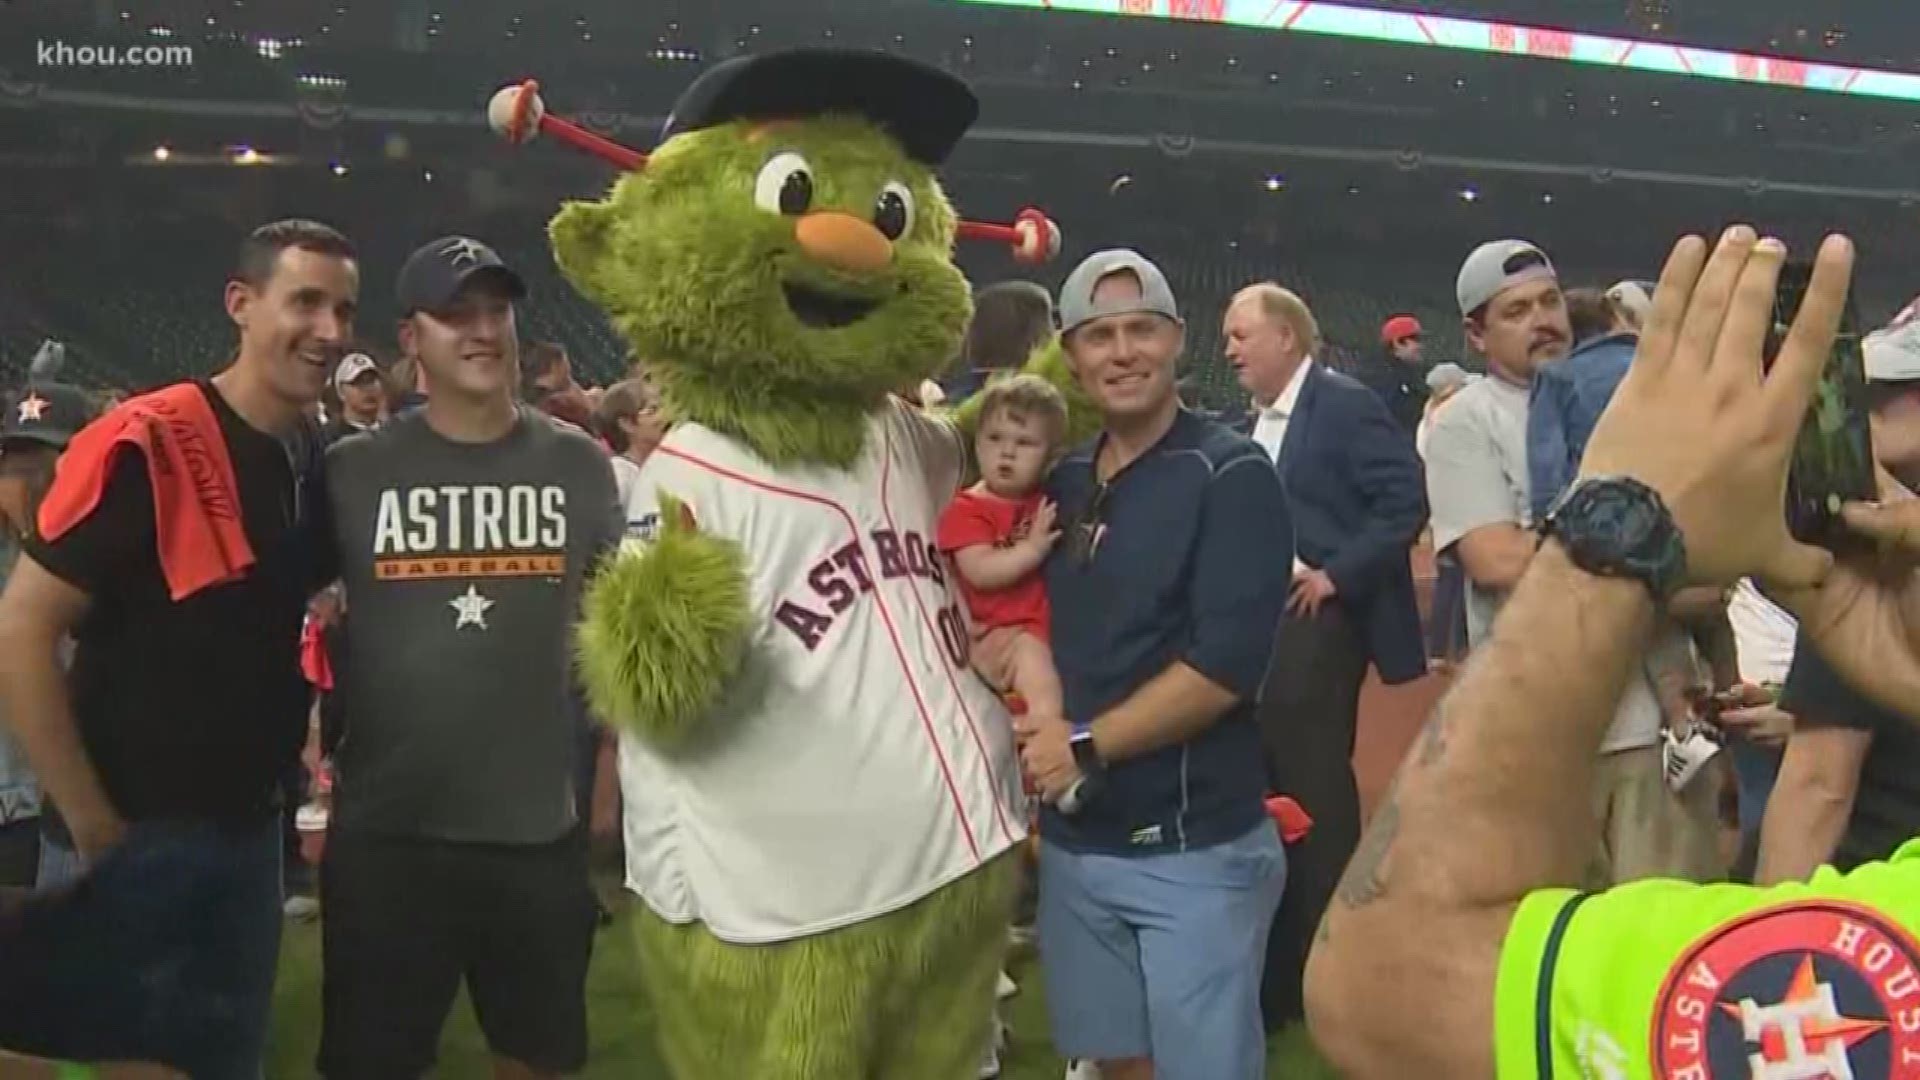 The Astros and their families celebrated the team's Game 5 win over the Rays Thursday night to advance to the ALCS.